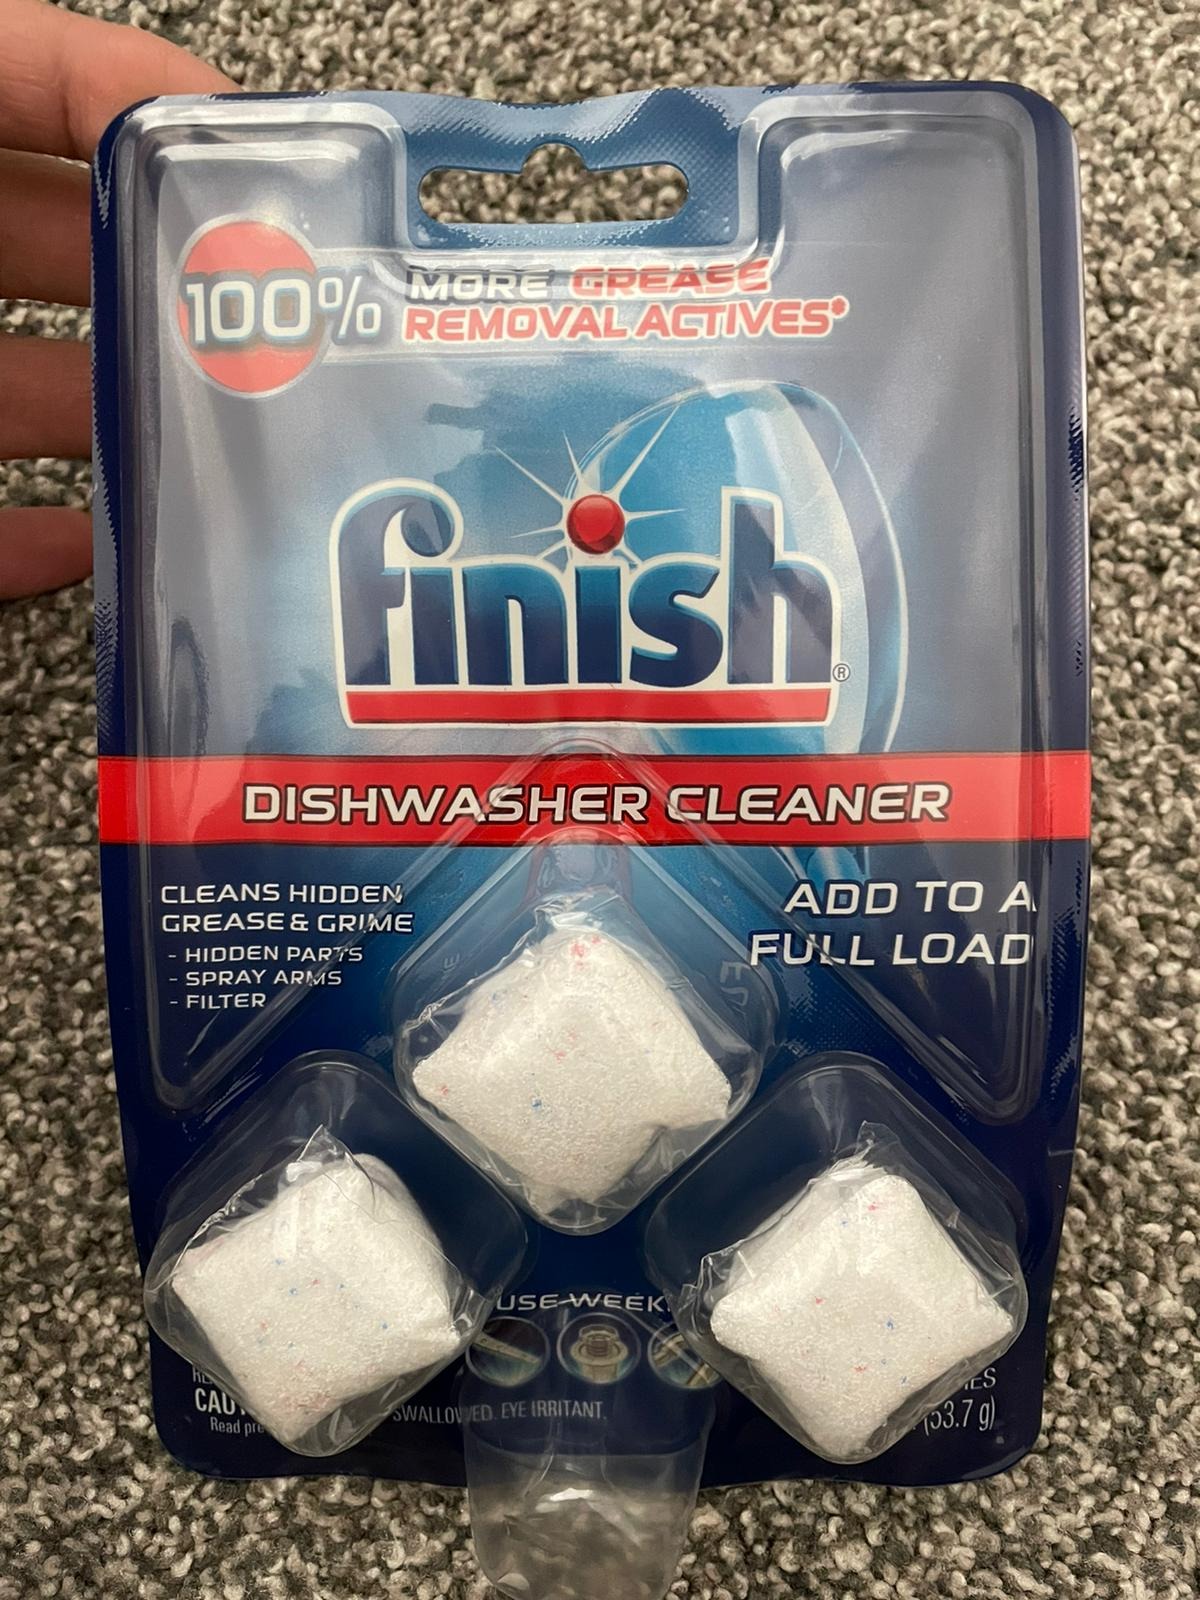 This dishwasher cleaner really works!